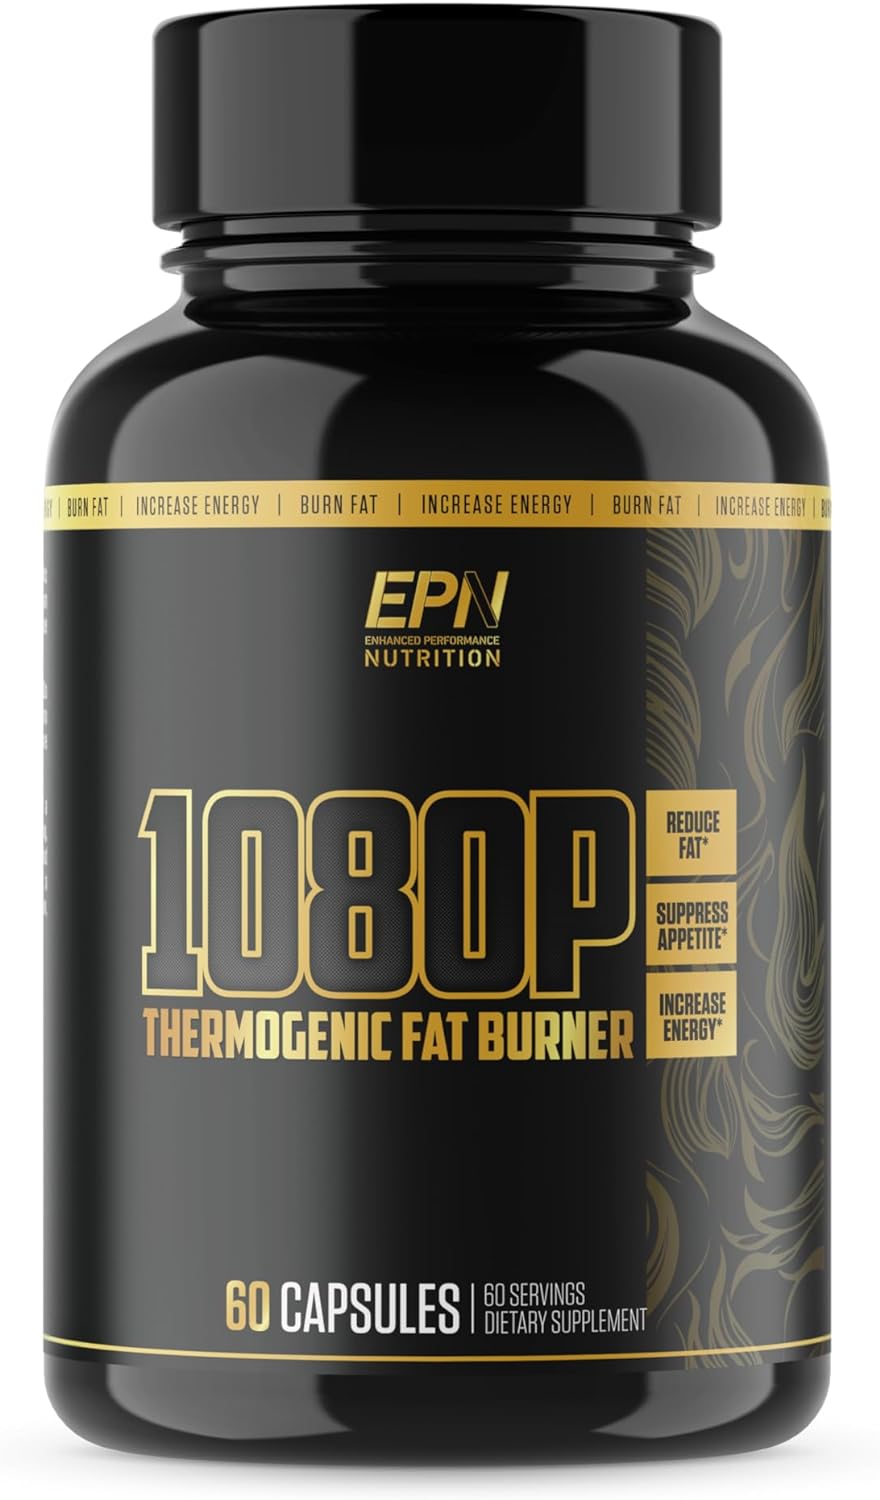 1080p Thermogenic Fat Burner | #1 Weight Loss Supplement Pills to Reduce Fat, Suppress Appetite, Boost Metabolism, Increase Energy  Focus w/L-Carnitine, Yohimbe Bark, Green Tea + More - 60 Servings